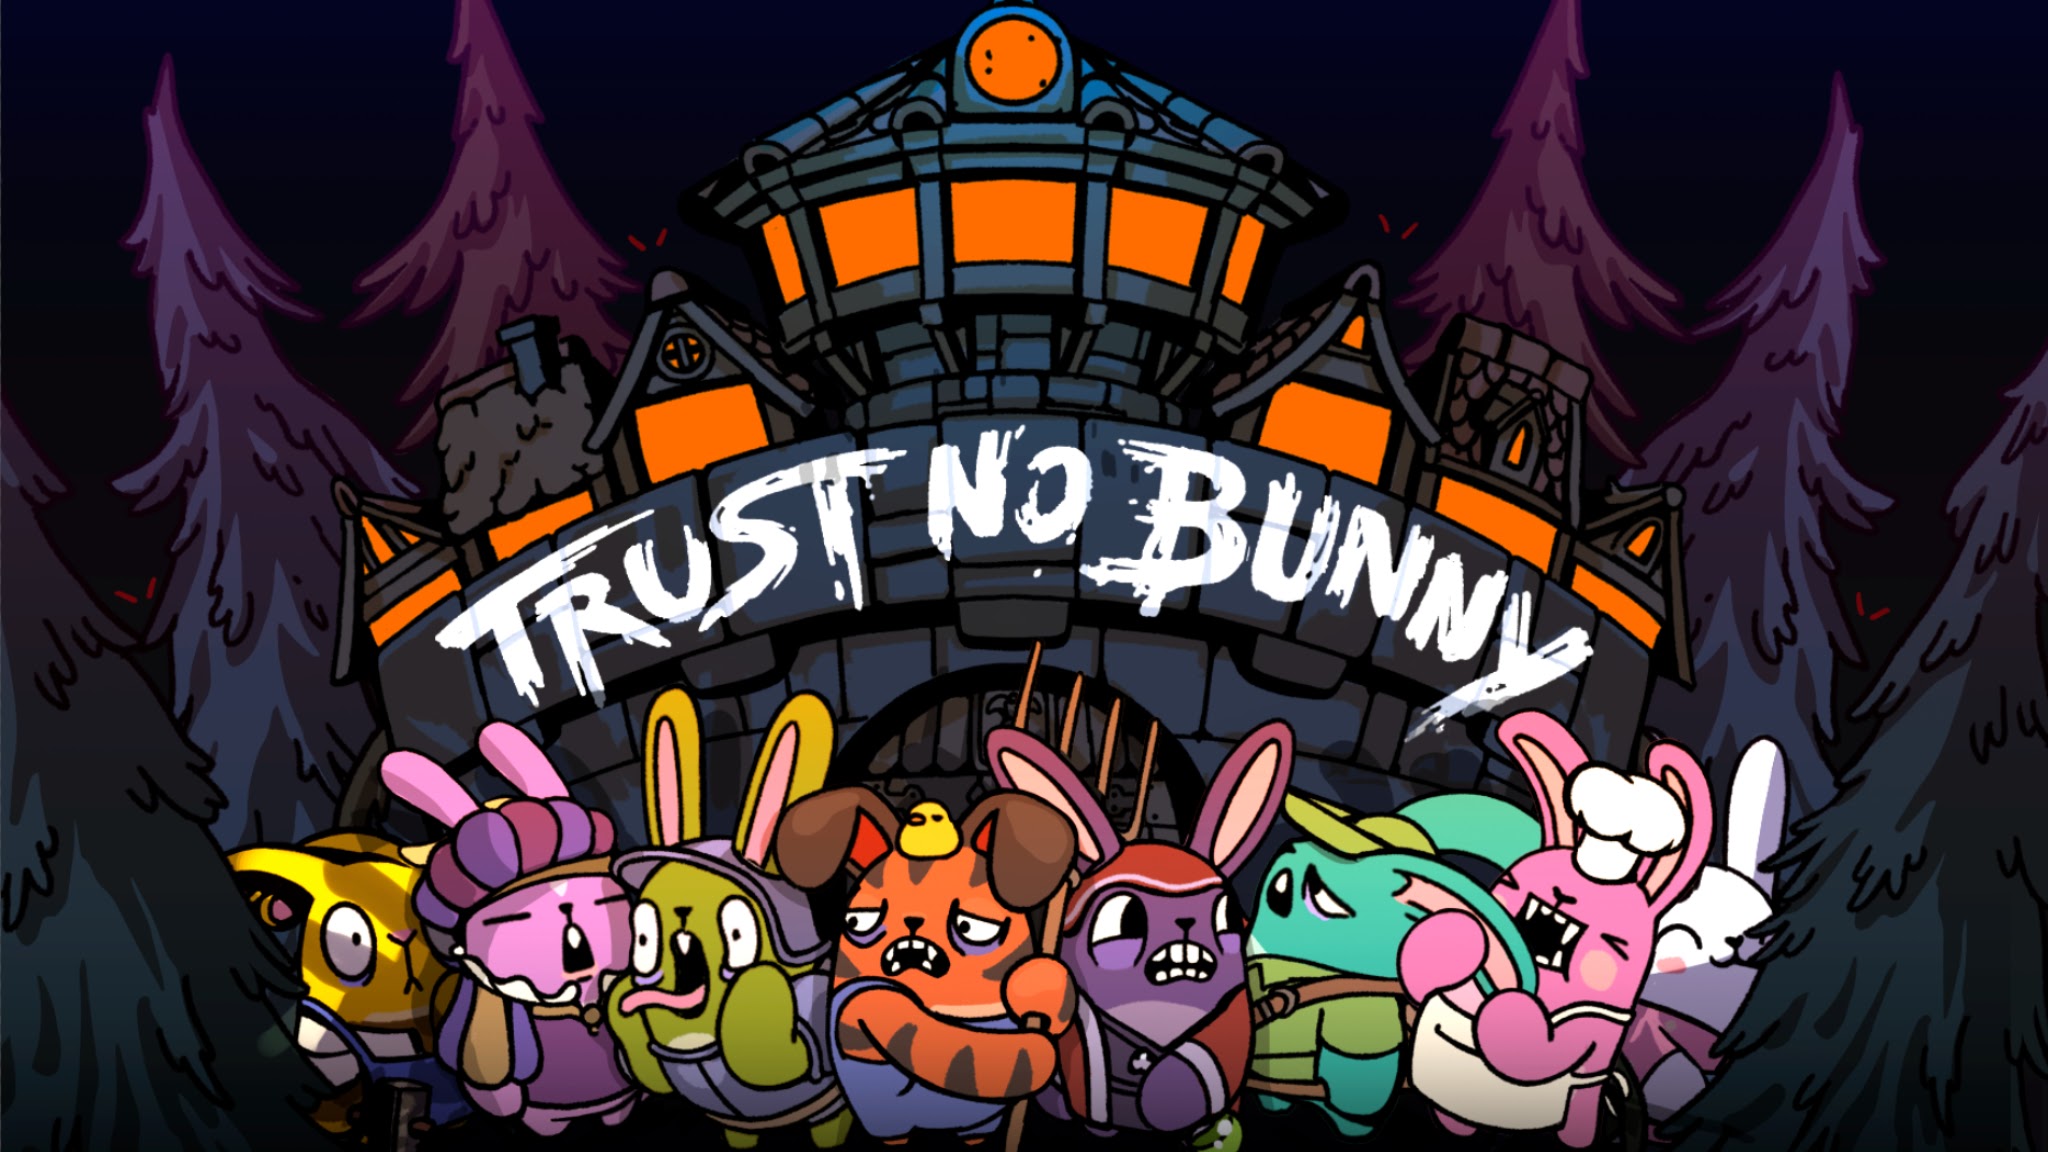 One of Trust No Bunny splashscreen/promotional media. Copyright goes to game's publisher or developer.